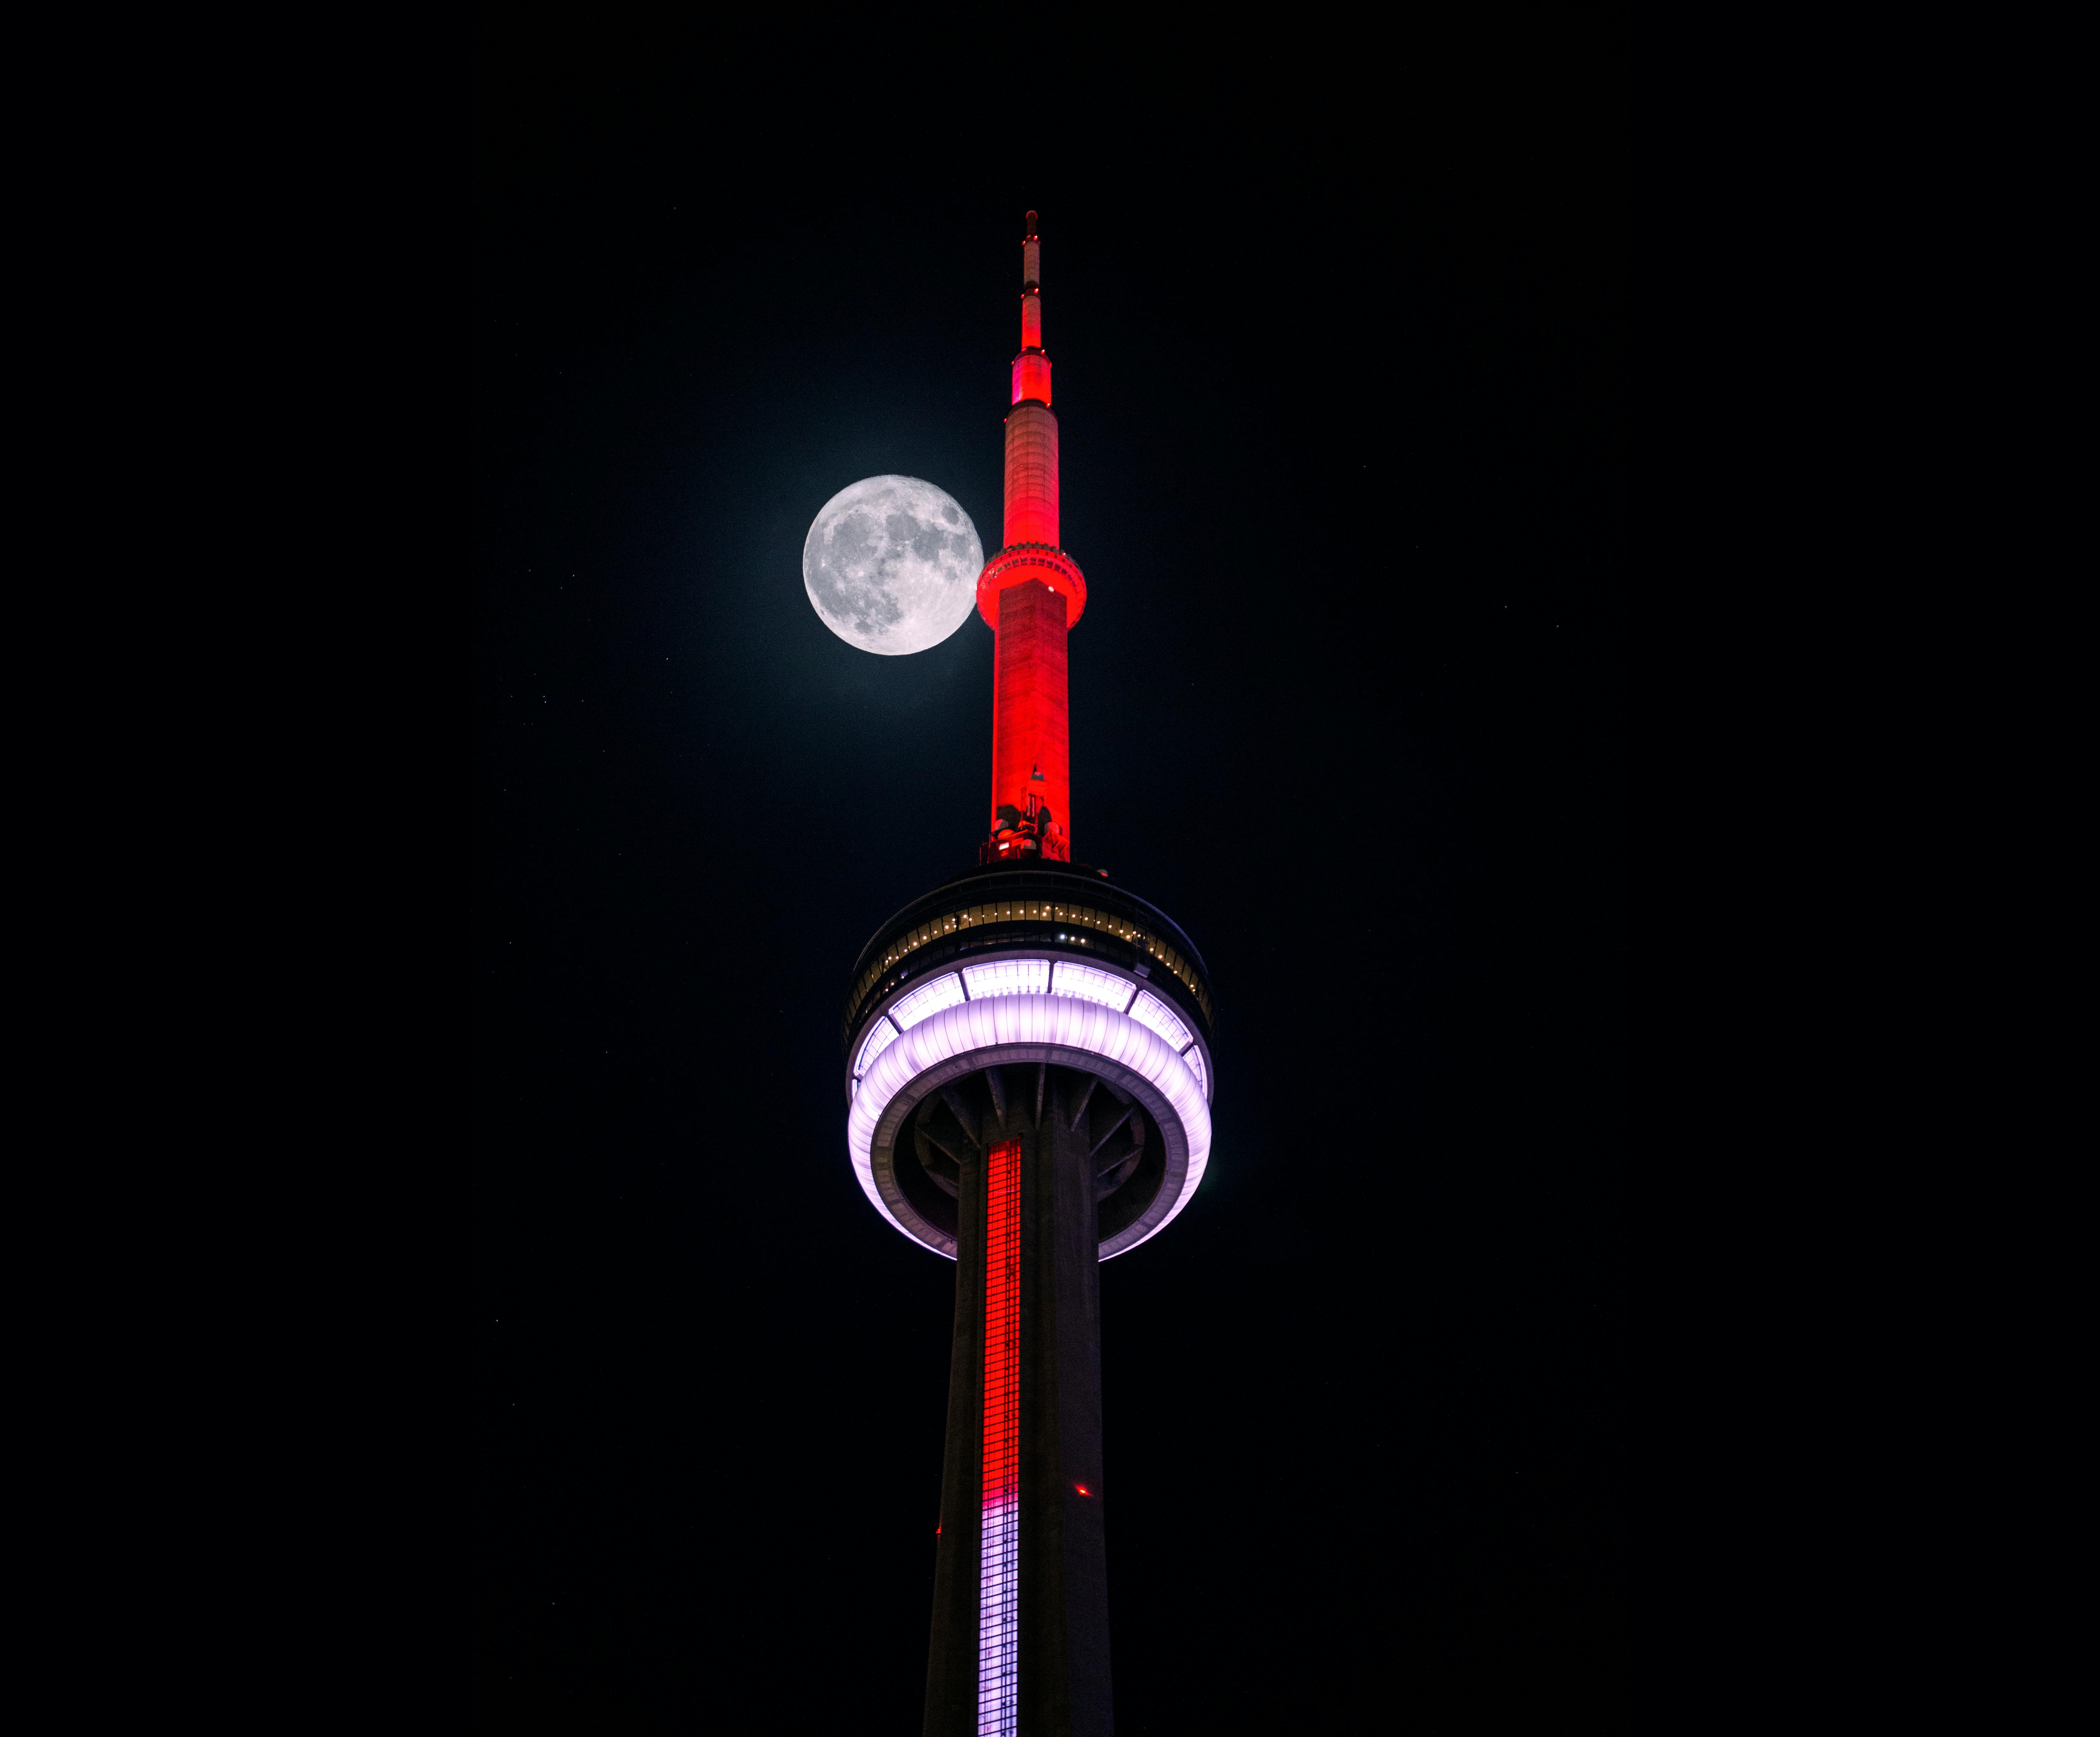 4536041 Toronto, CN Tower, city, Canada - Rare Gallery HD Wallpapers